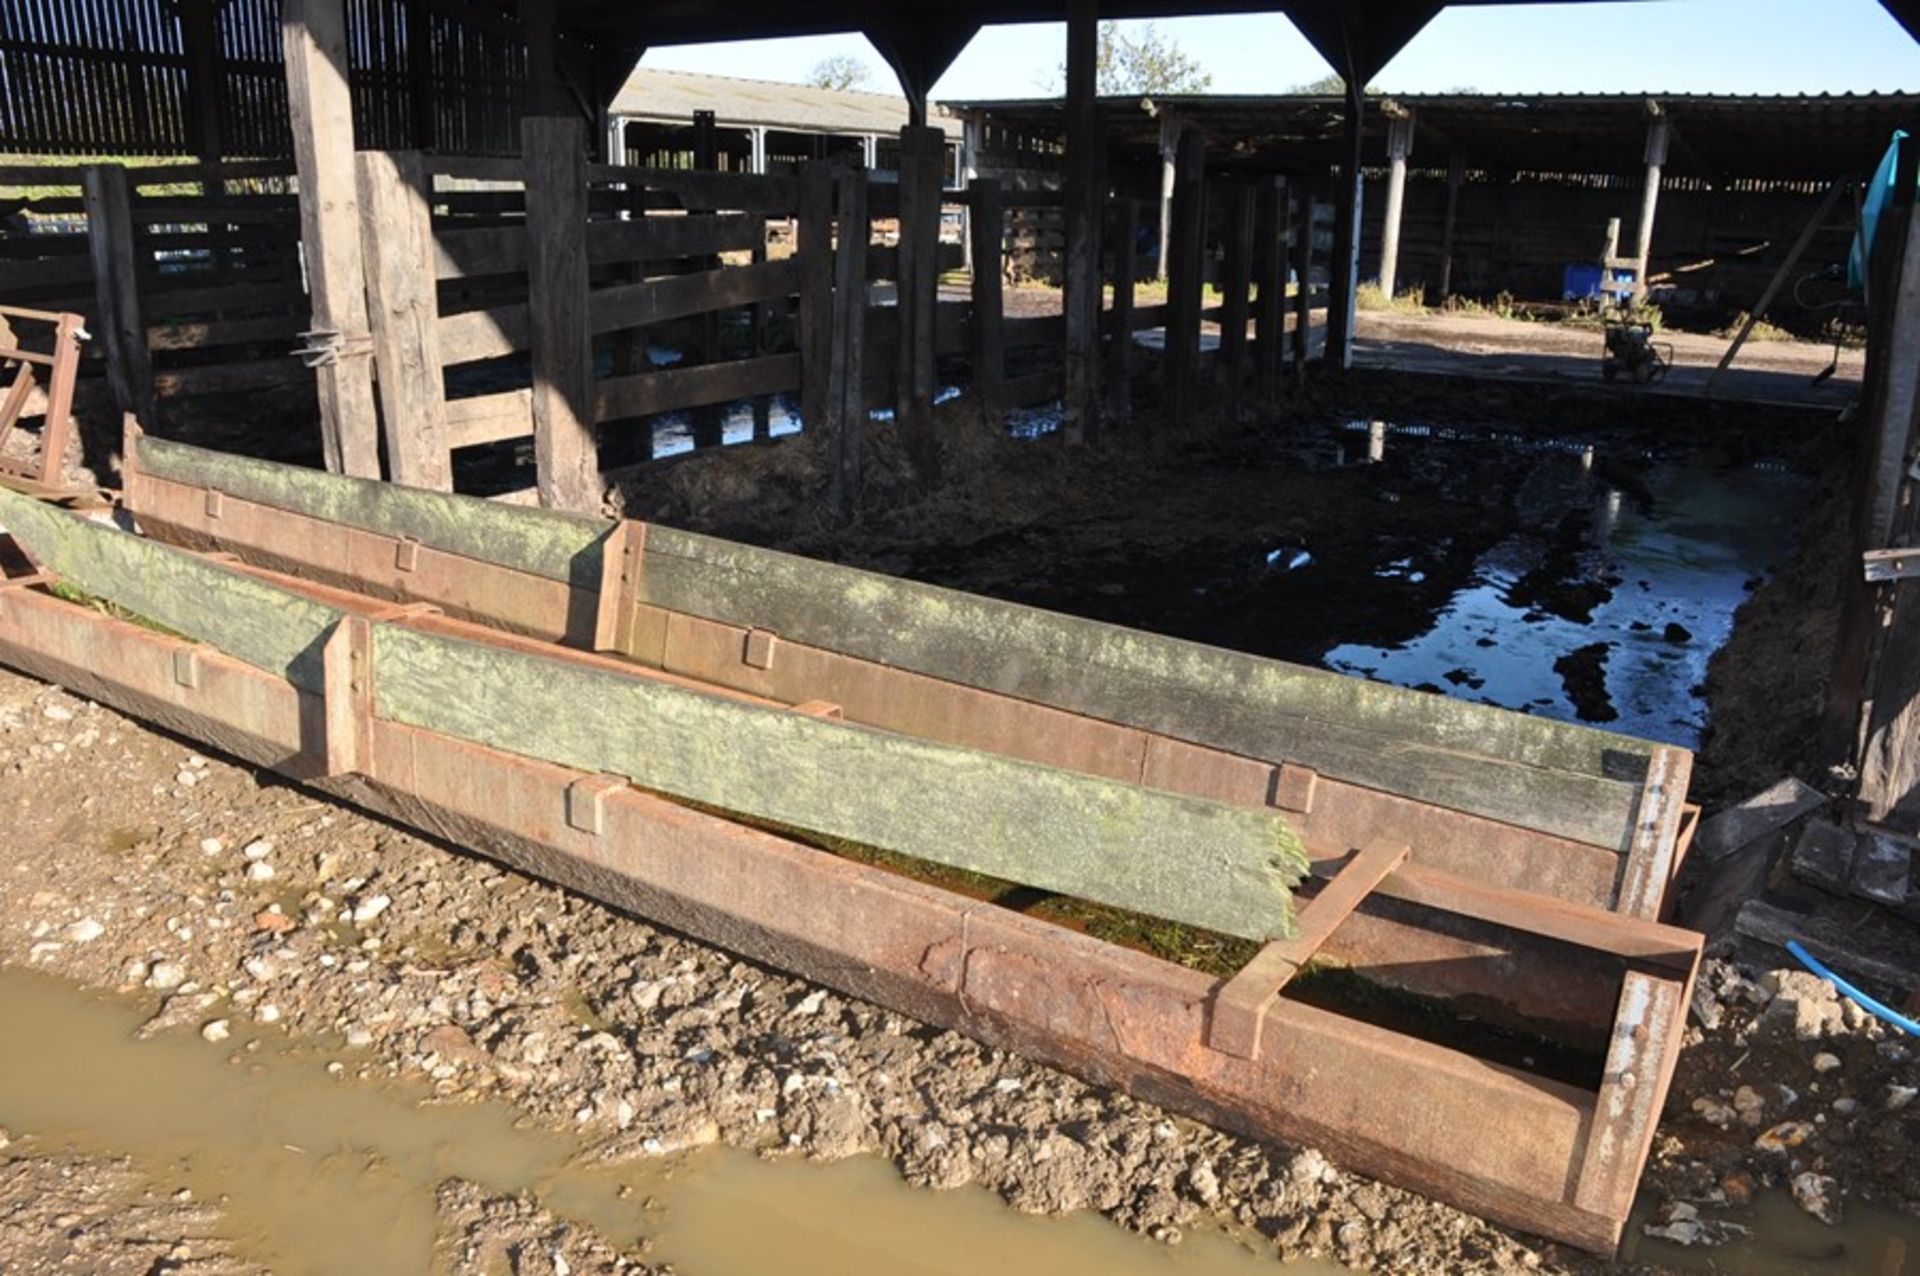 20ft Abel made feed trough